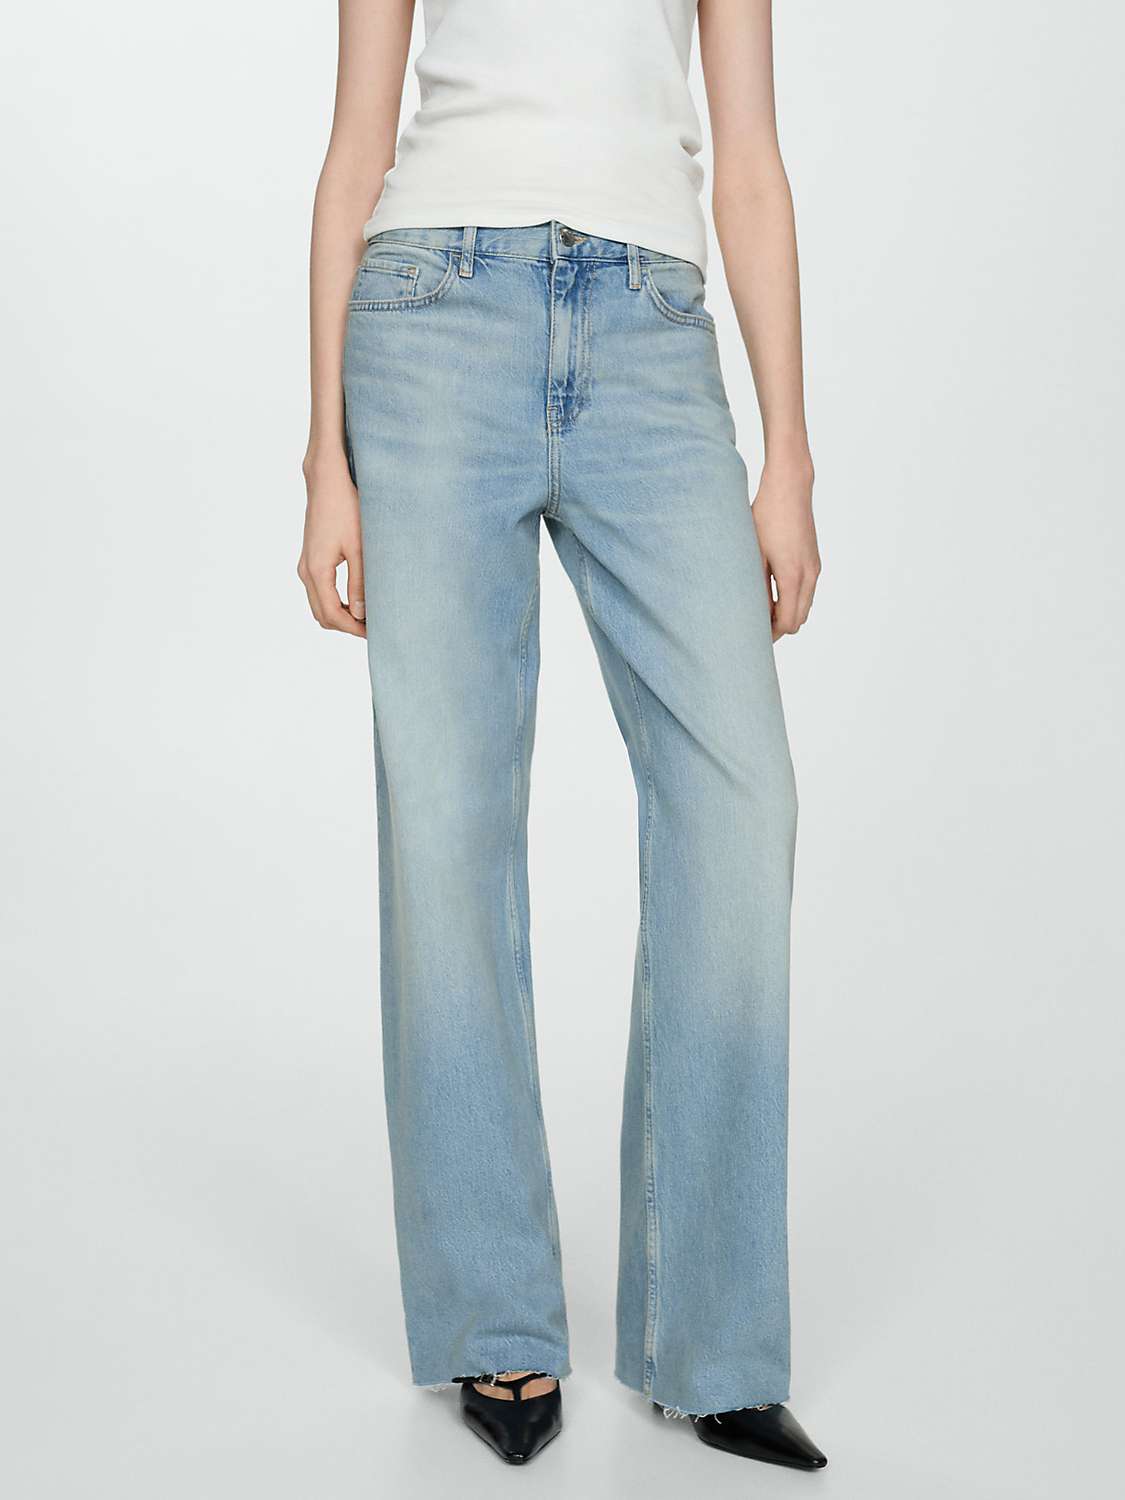 Buy Mango Denis Mid Rise Straight Jeans, Open Blue Online at johnlewis.com